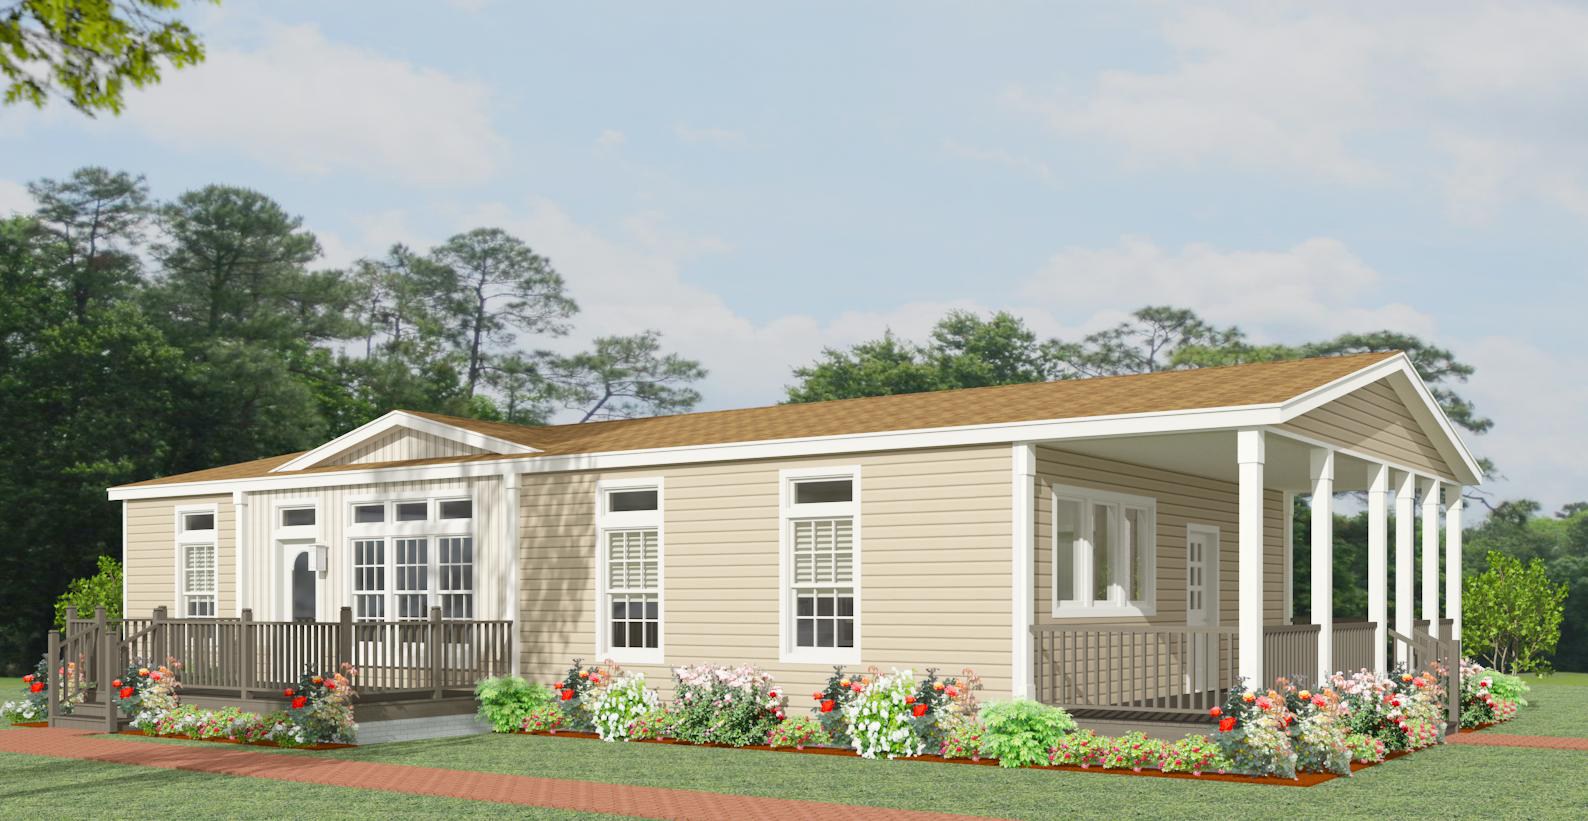 How Many Bedrooms Does Your Manufactured Home Need?